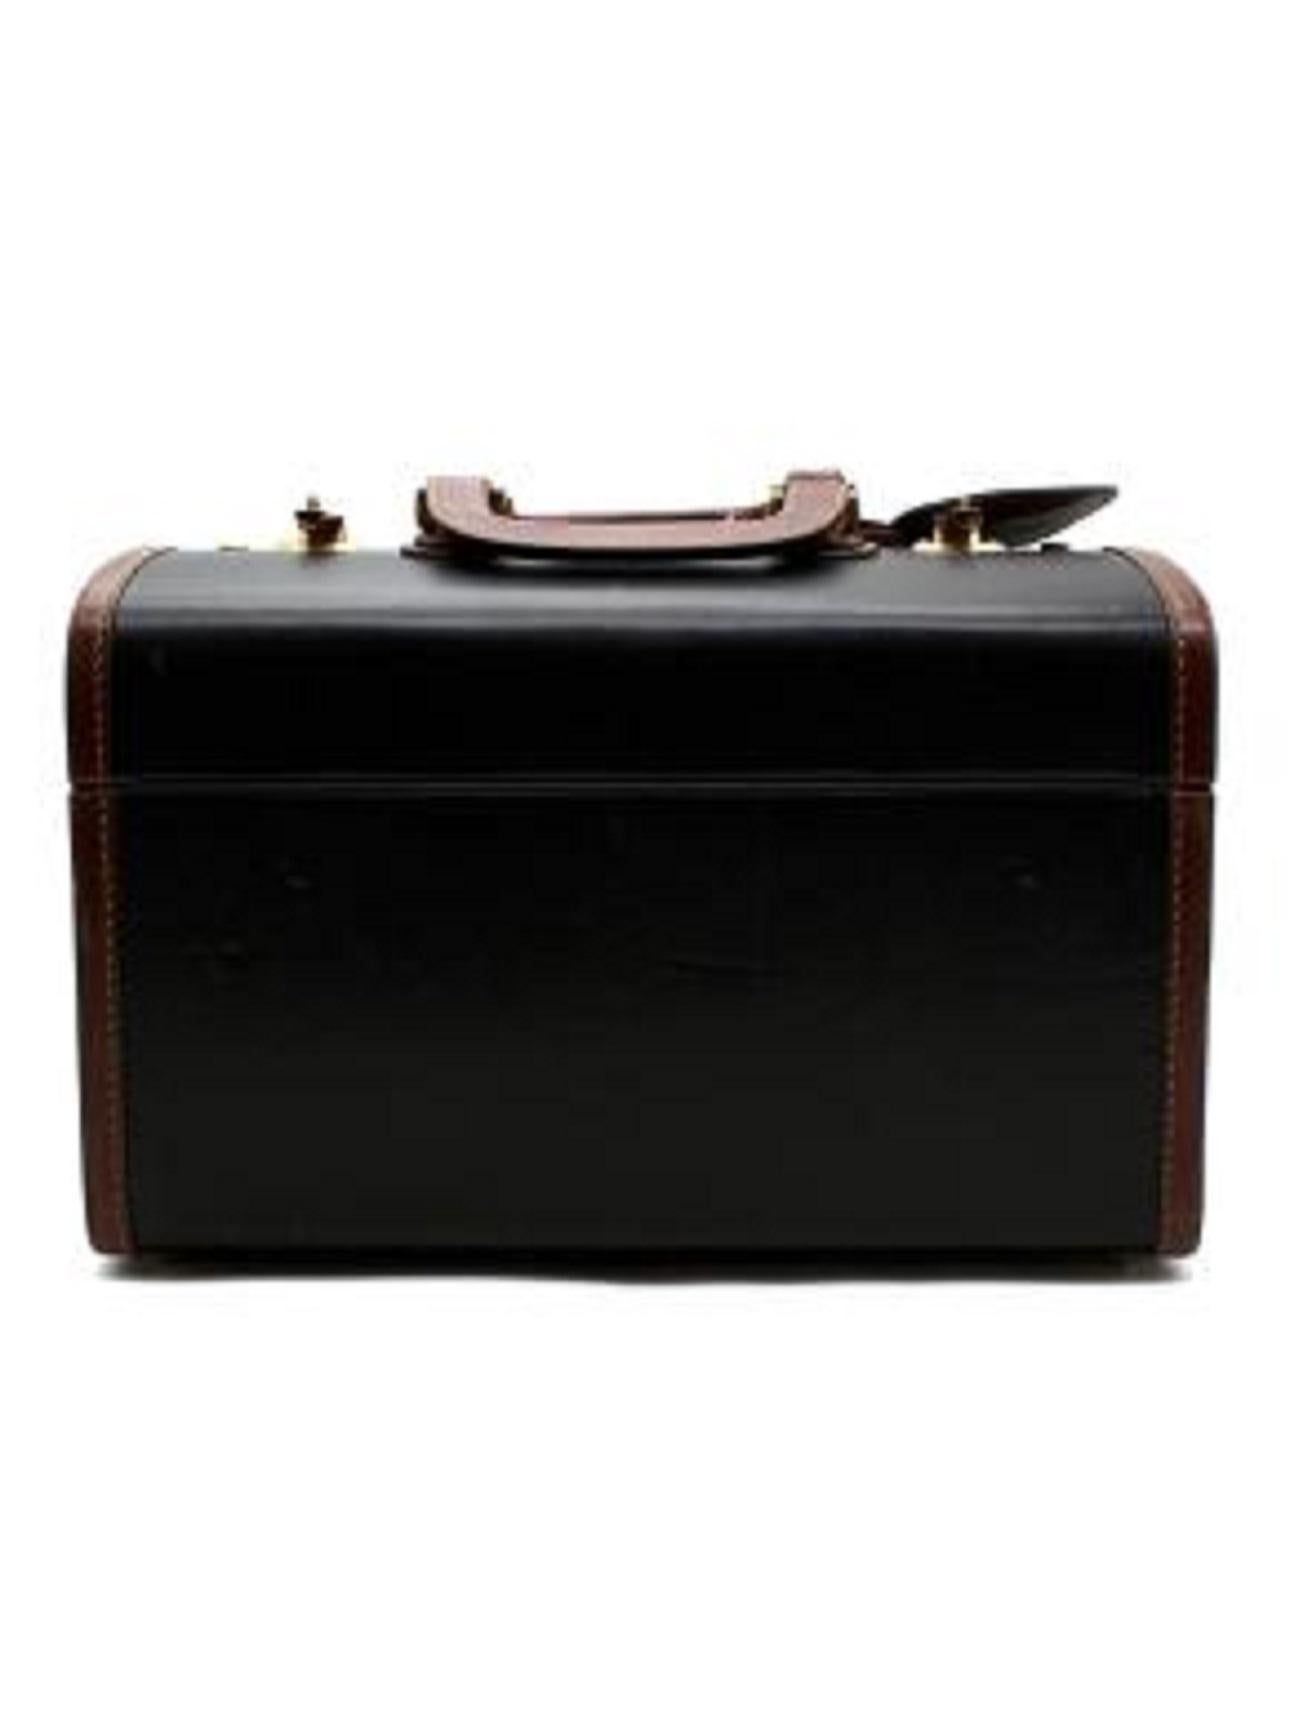 Gucci Vintage Black & Tan Leather Travel Box with Locks

- Structured leather box/case with top handles 
- Monogram canvas lining 
- 2 gold metal code locks on the top
- Double sided fold opening 
- Leather straps inside and internal pockets 
-